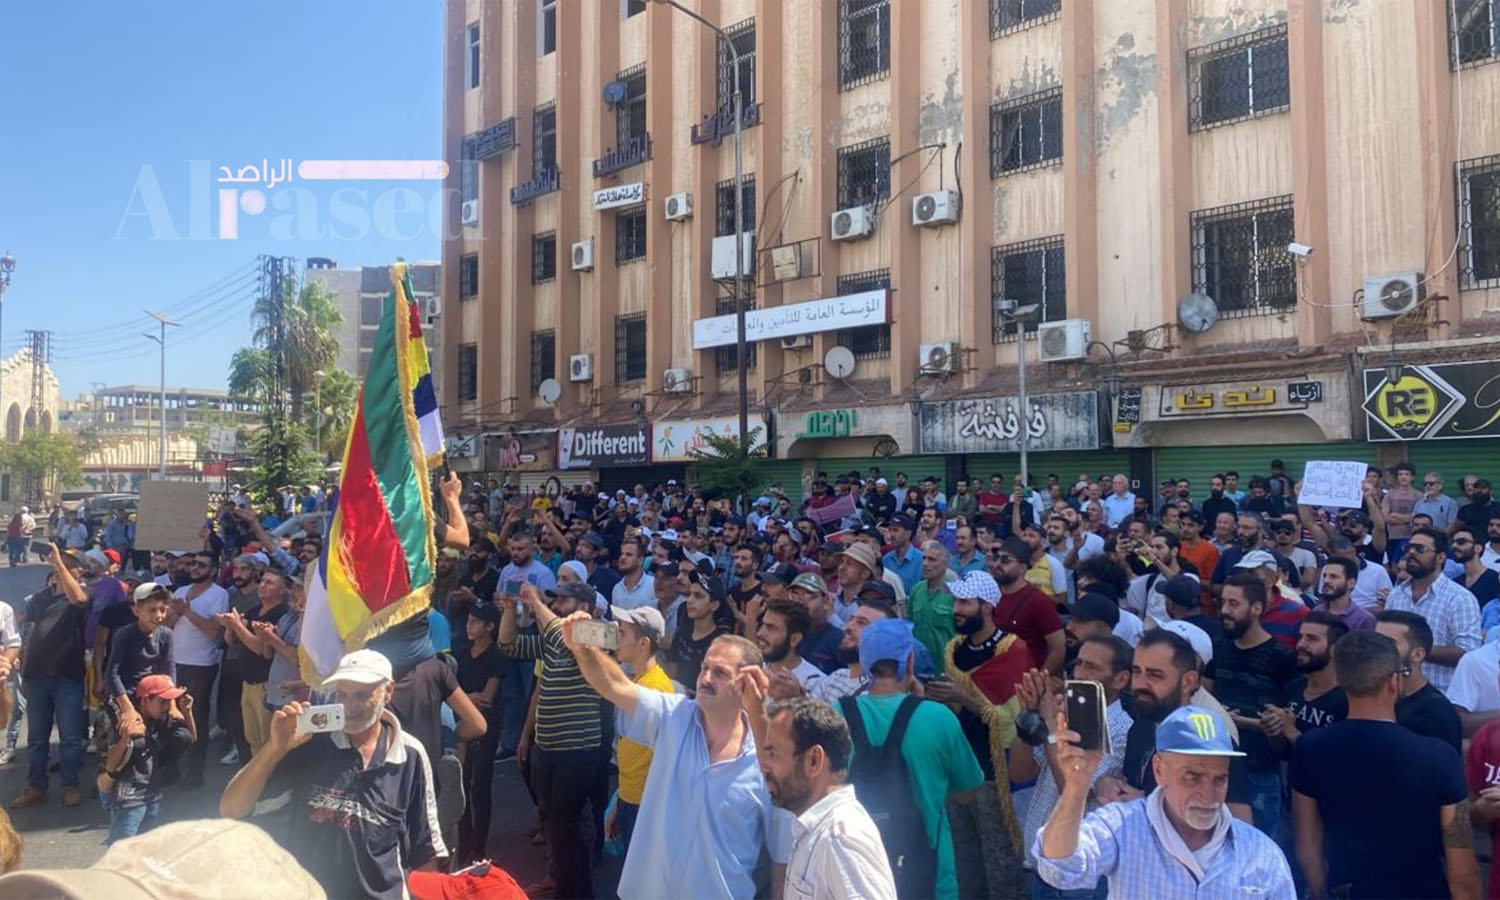 Protesters chanting and calling for the overthrow of the Syrian regime in al-Sayer Square in the city center of As-Suwayda - August 22, 2023 (Facebook/Al-Rased)